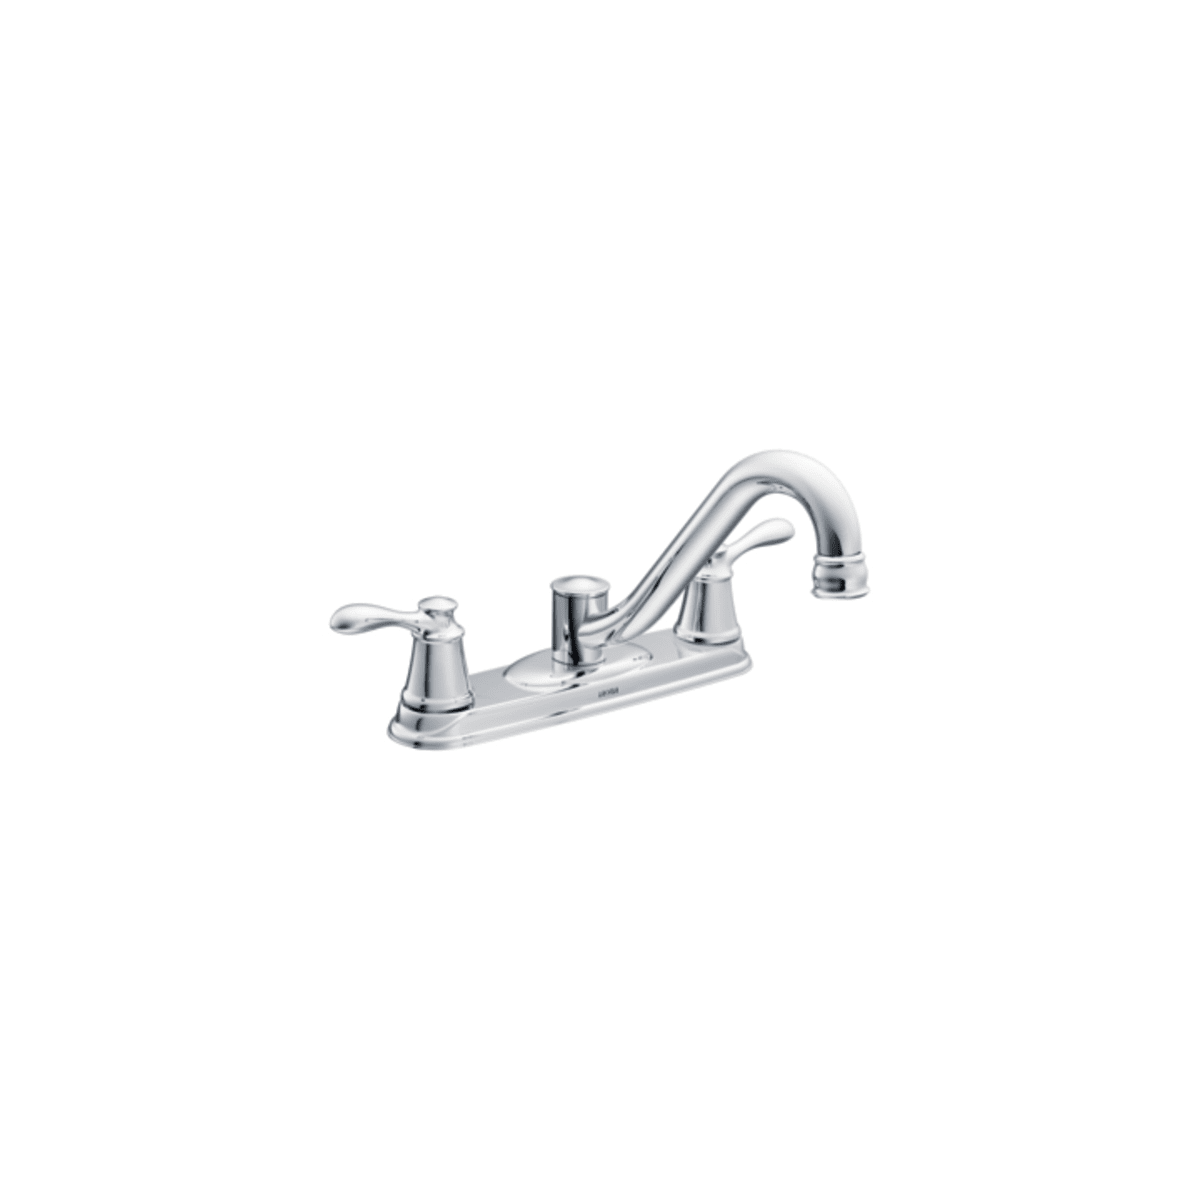 Moen Ca87621 Chrome Double Handle Low Arc Kitchen Faucet From The